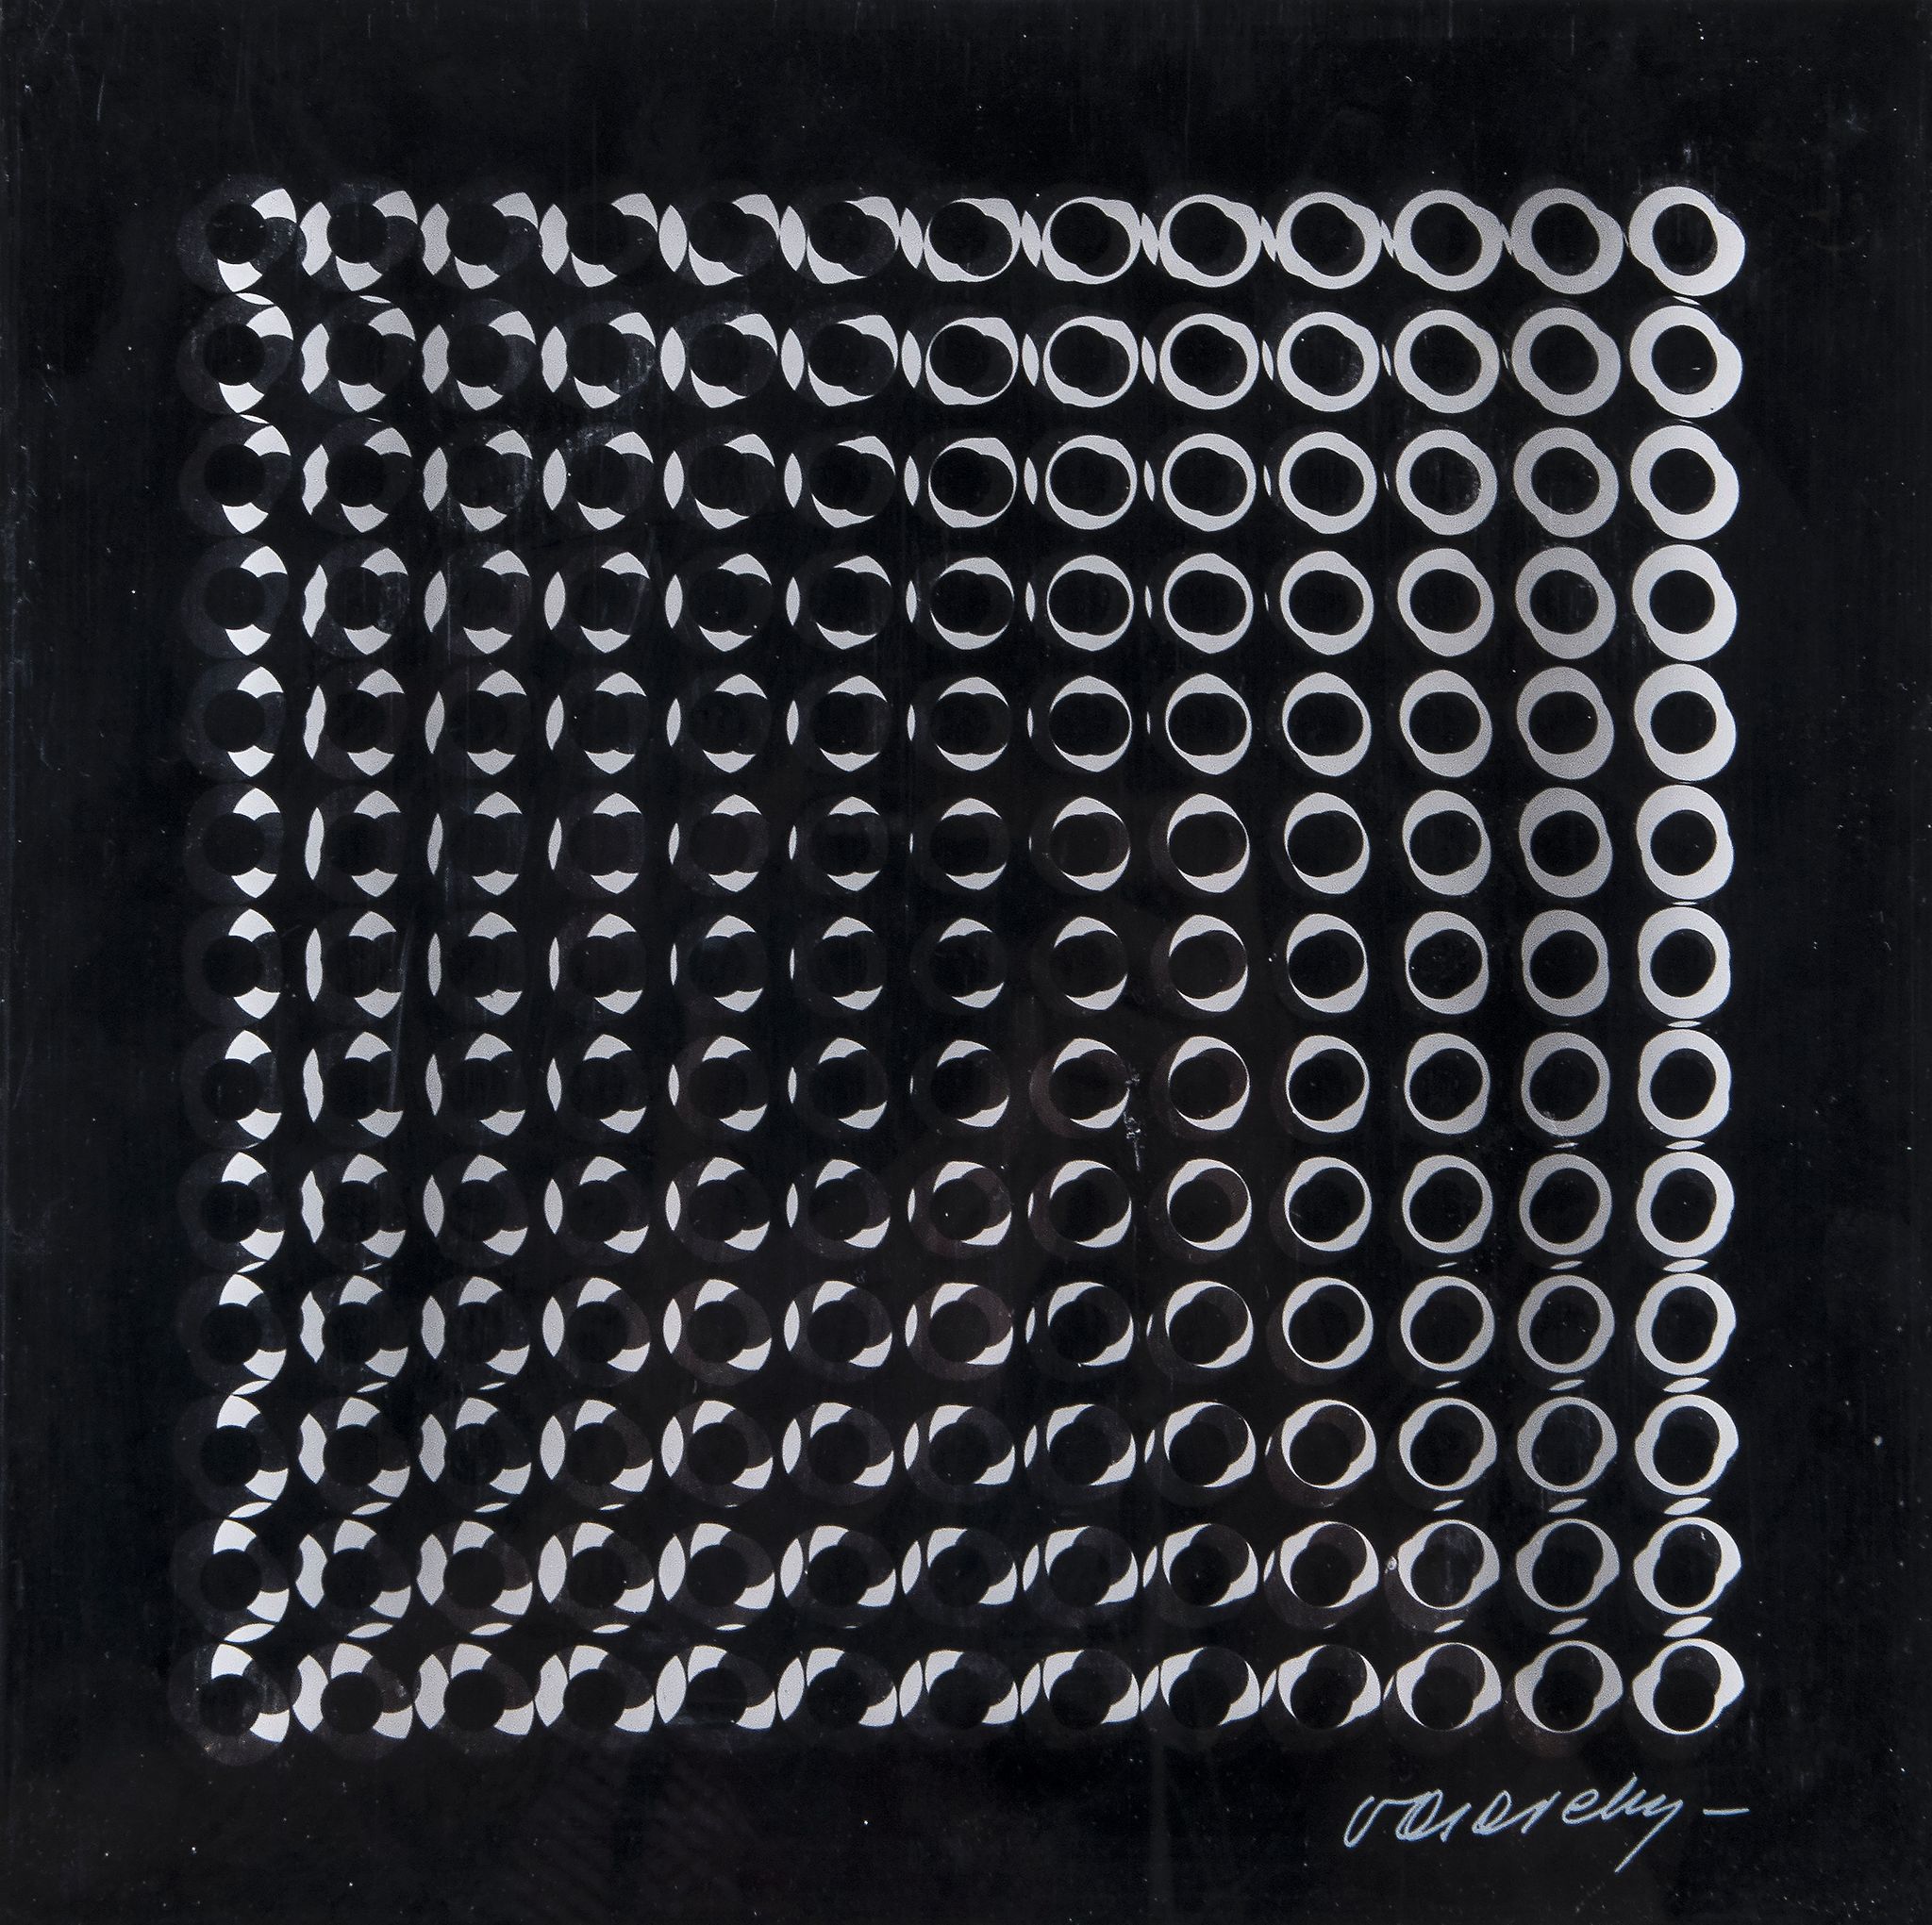 Victor Vasarely (1906-1997) - Objet Cinetique silkscreen on plexiglass in two parts, housed in the